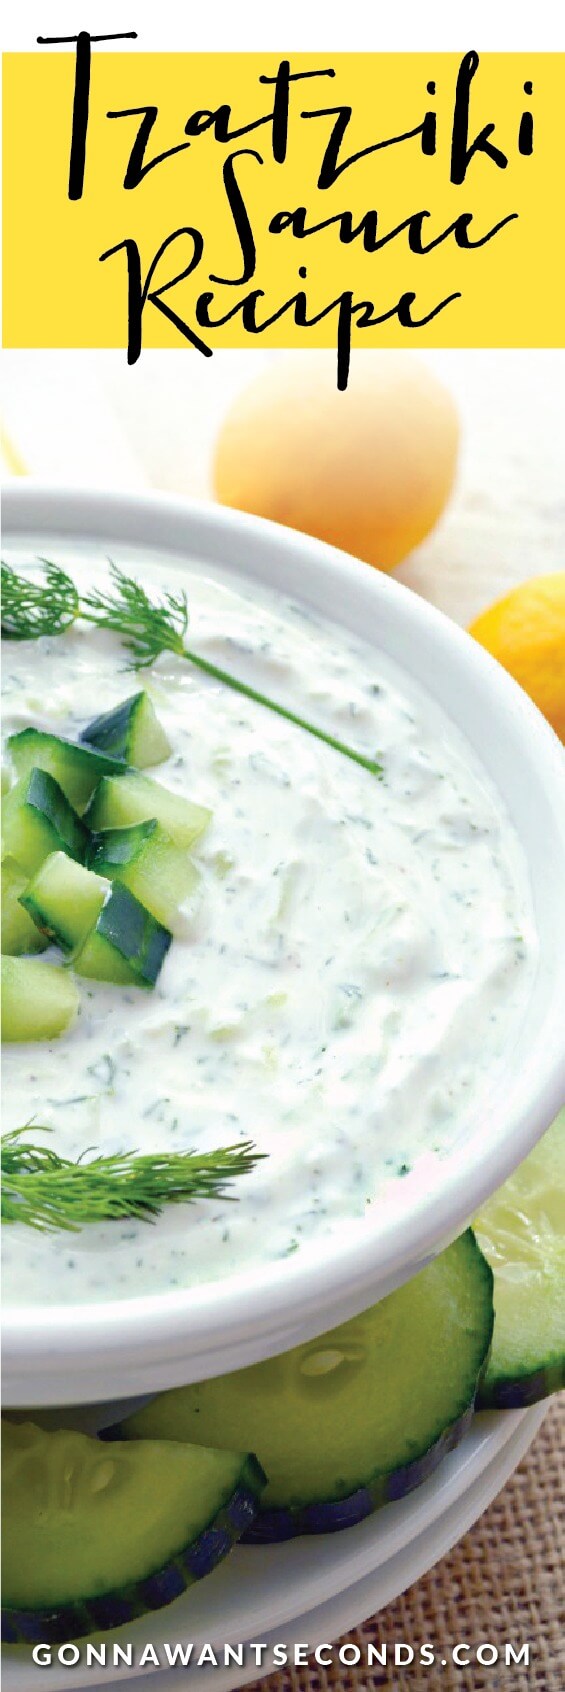 Super easy and delicious homemade Tzatziki Sauce Recipe. Great as a healthy dip, sauce for grilled meat, or spread for sandwiches. Thick, rich and creamy. Flavored with garlic, lemon and dill. Amazing!